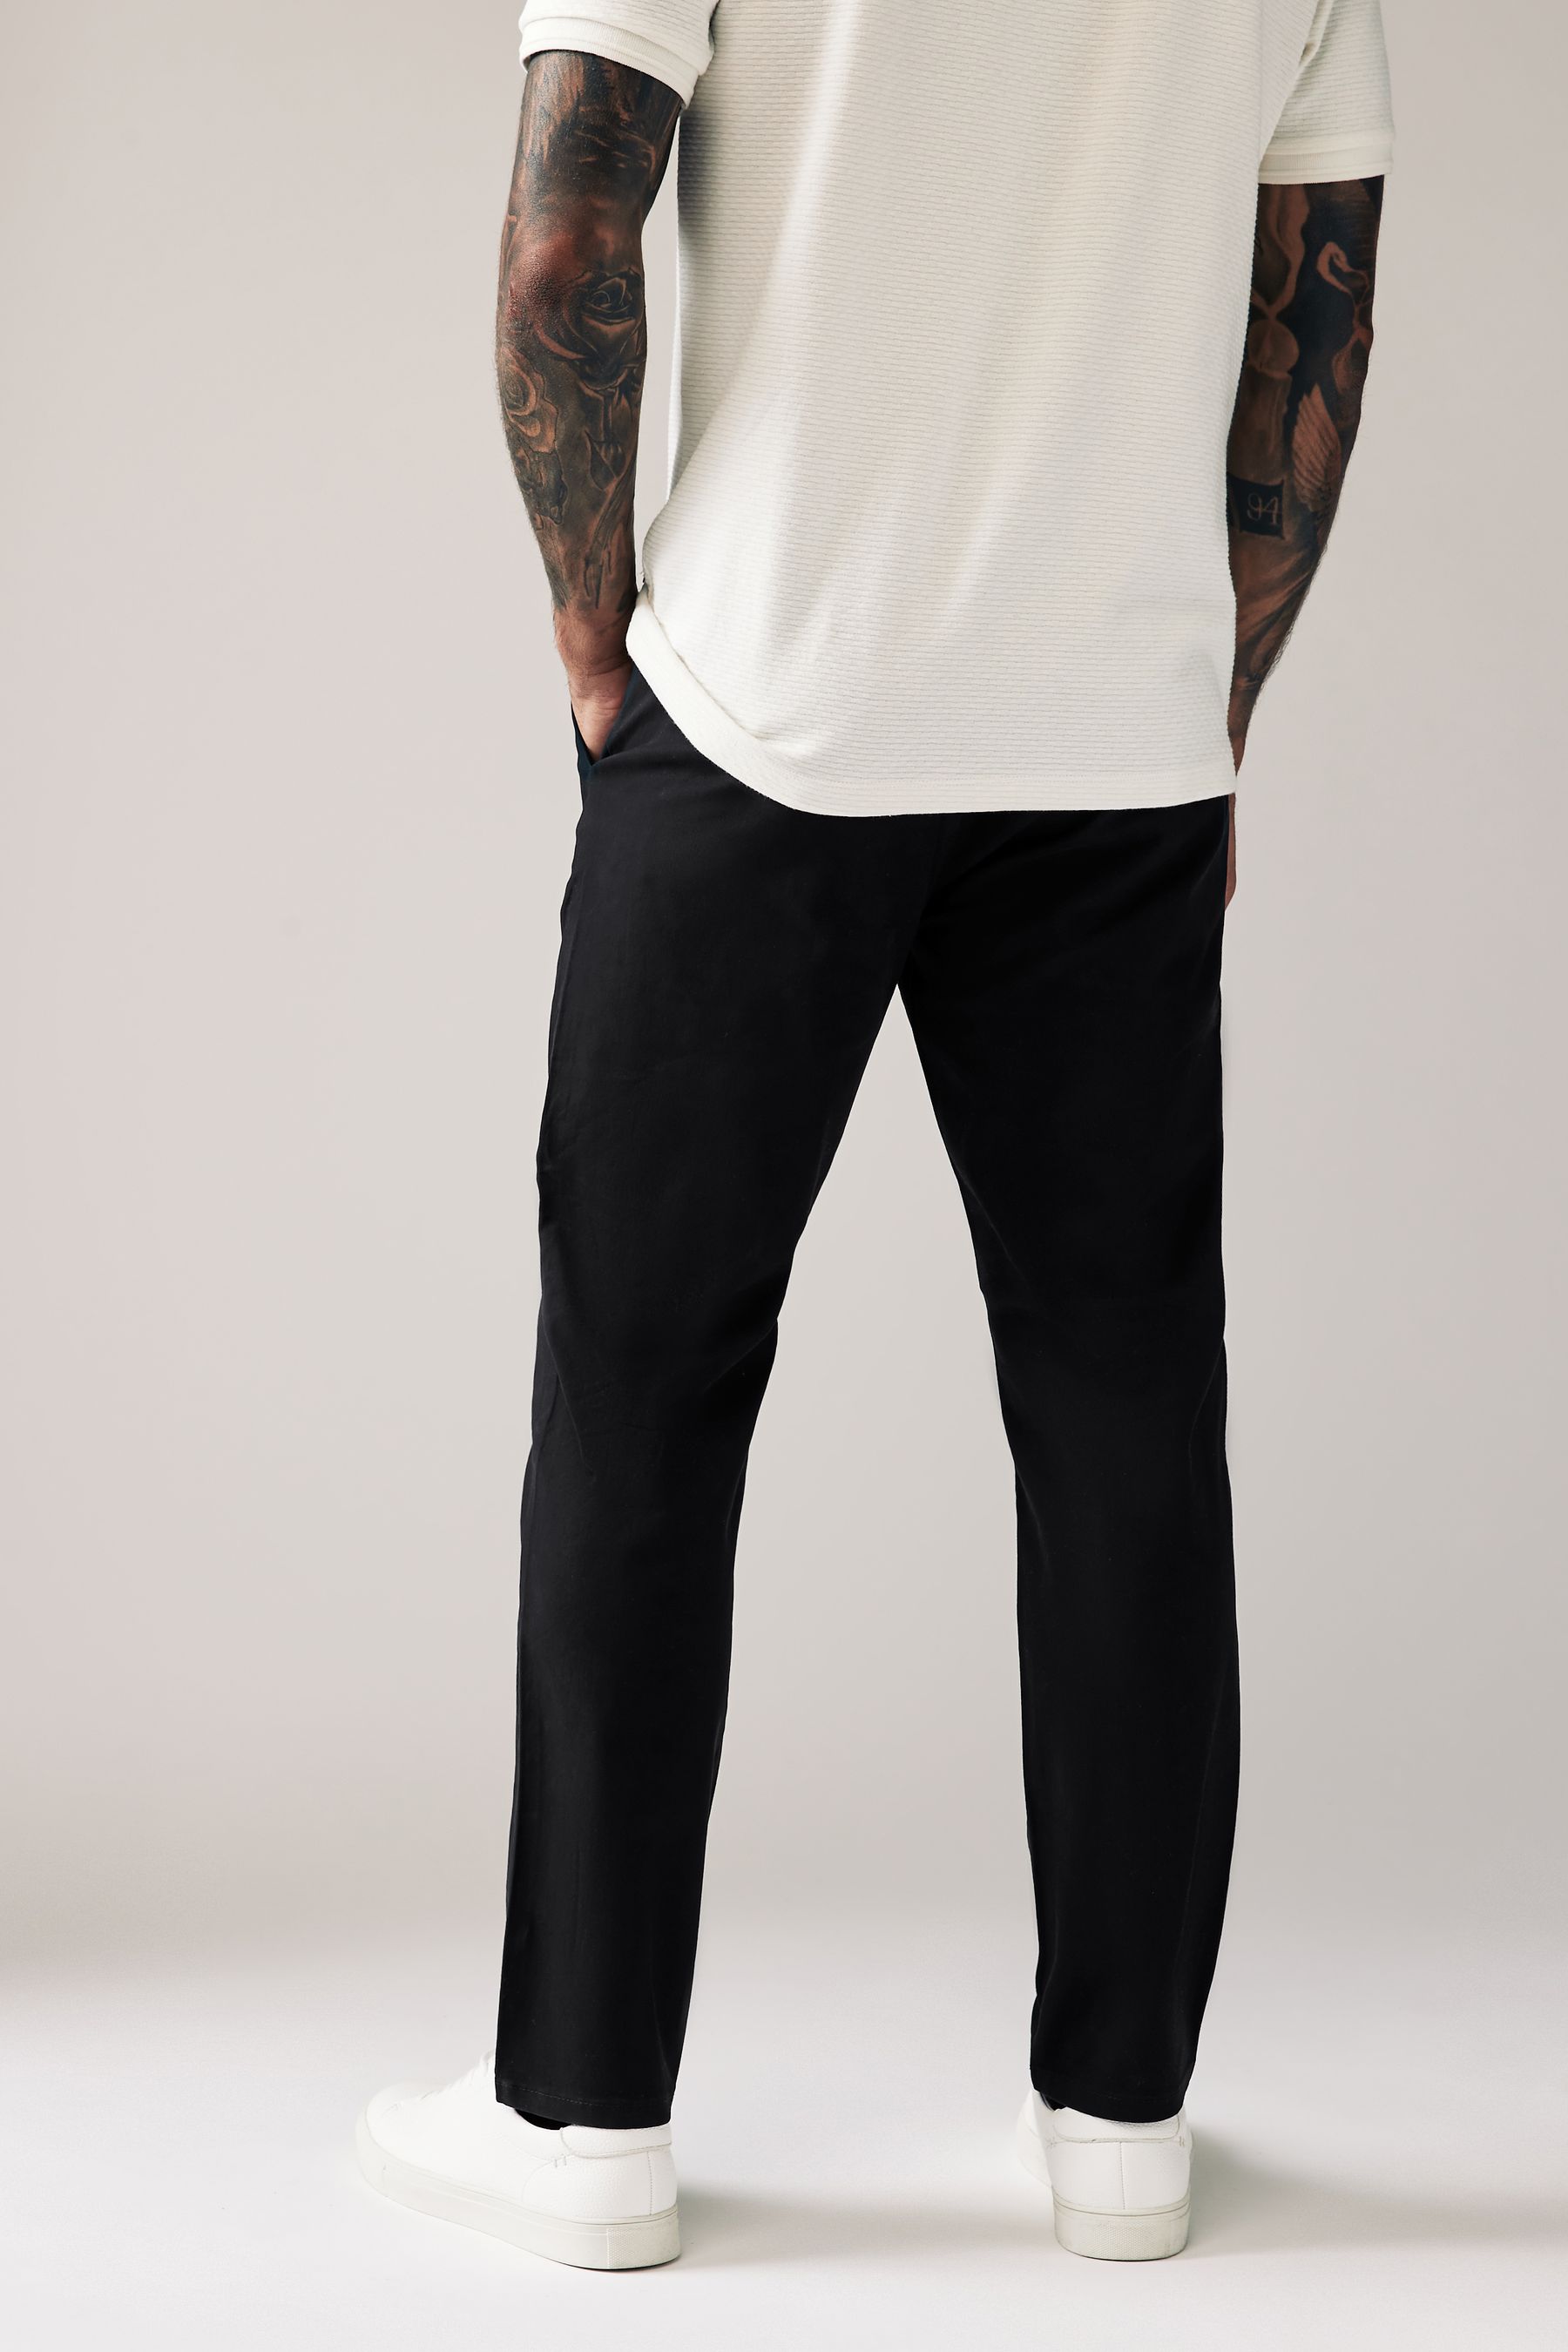 Buy Black Slim Stretch Chinos Trousers from the Next UK online shop